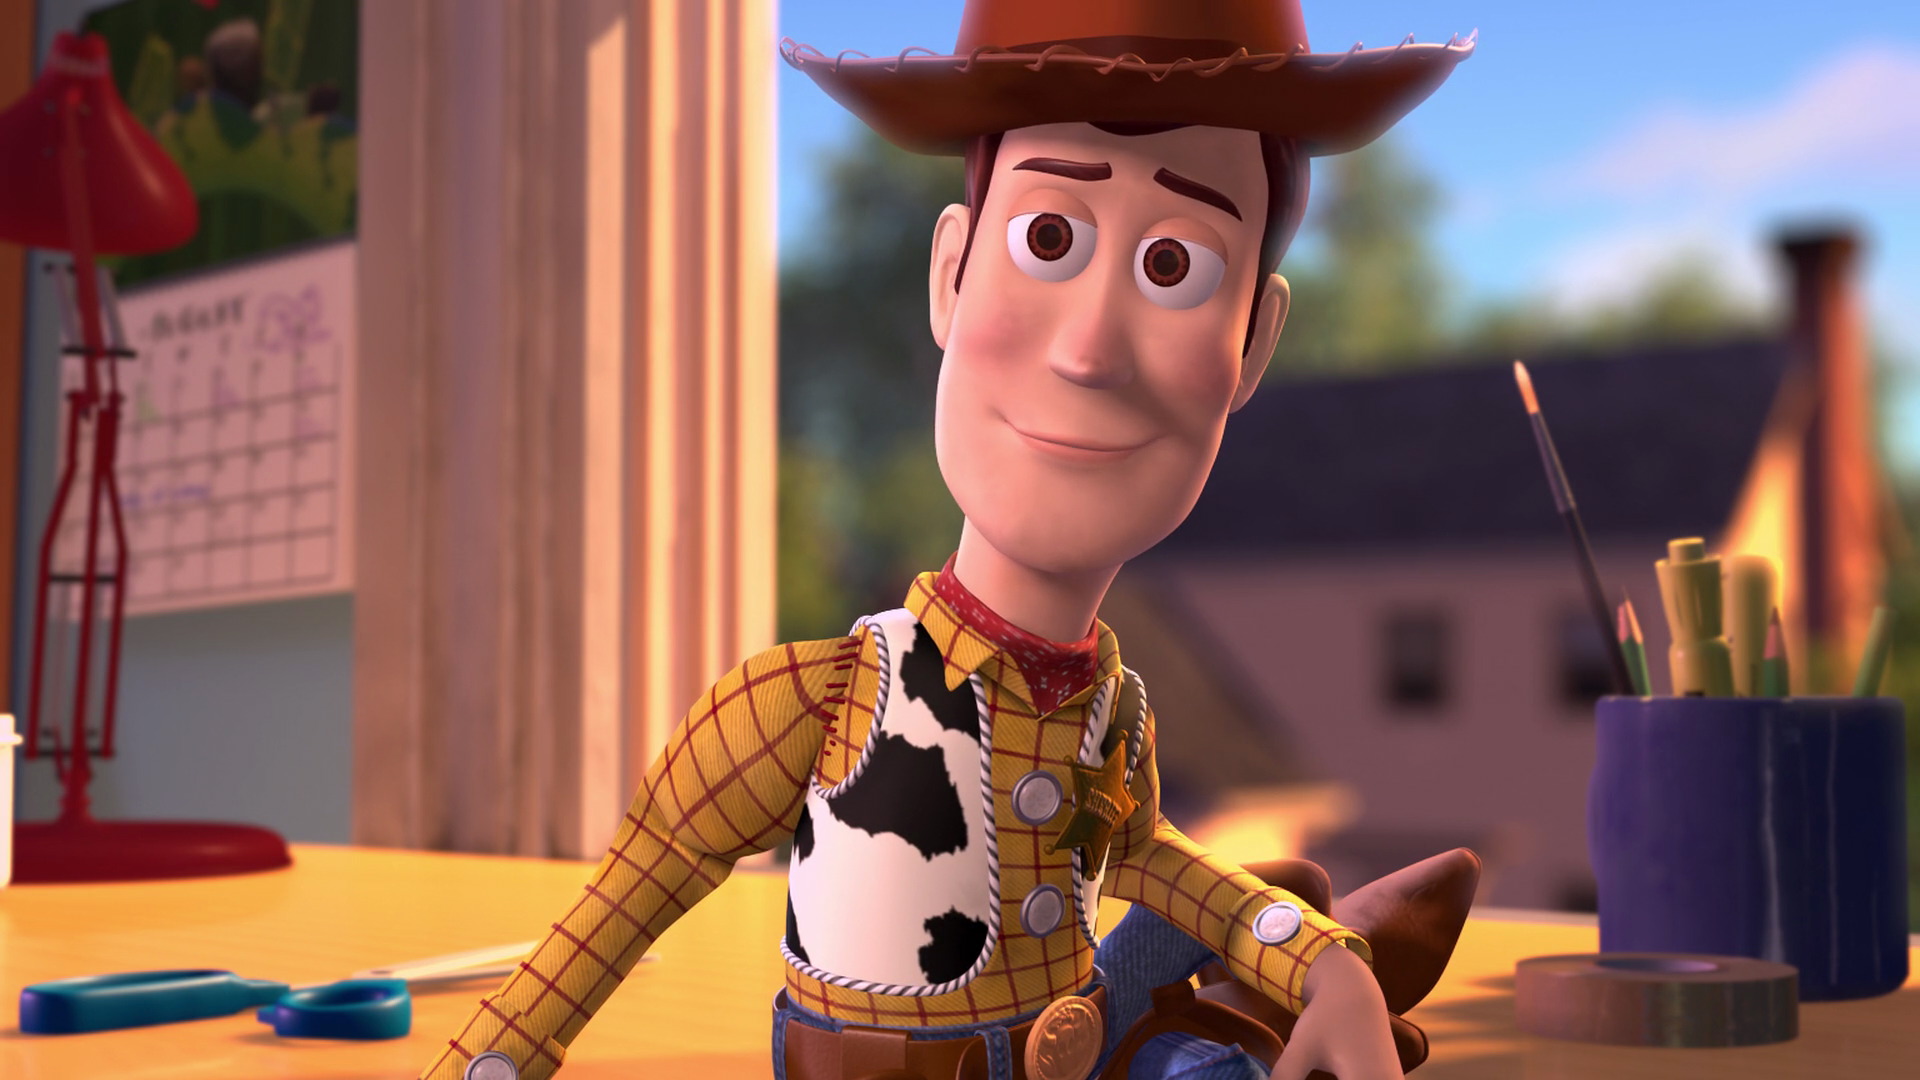 Toy Story 2 - Story Structure Analysis